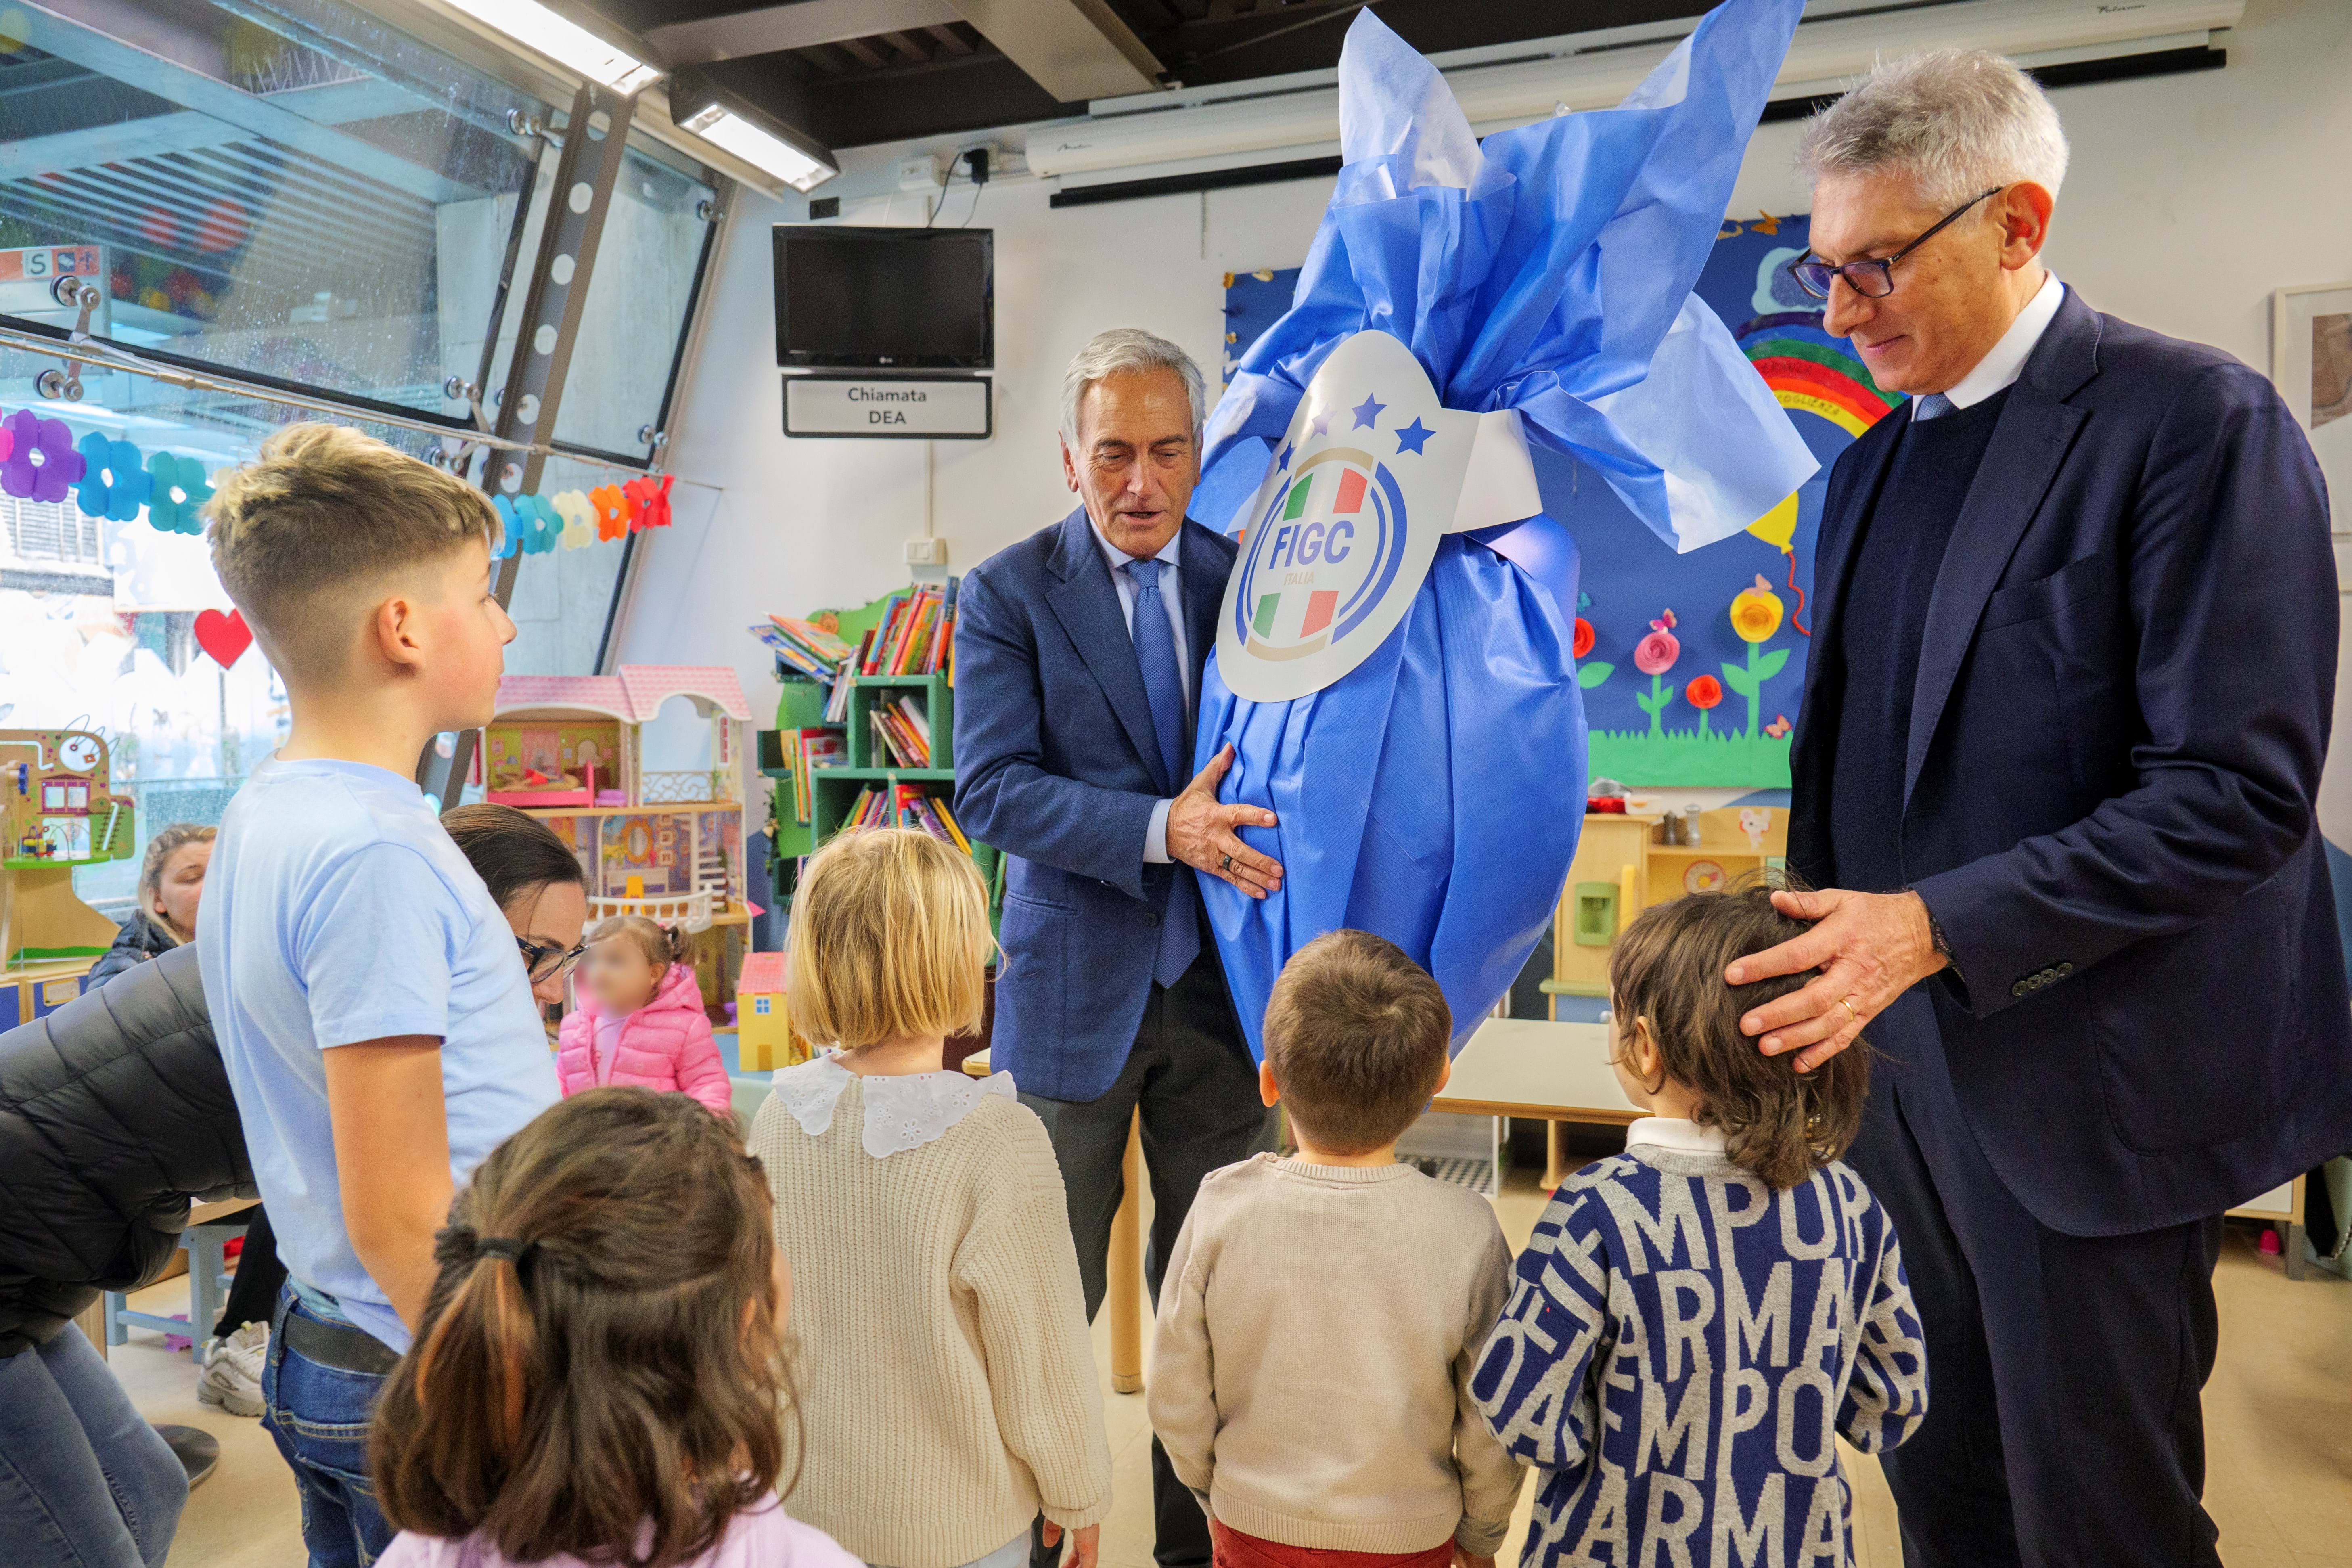 The FIGC celebrate Easter with the Bambino Gesù hospital